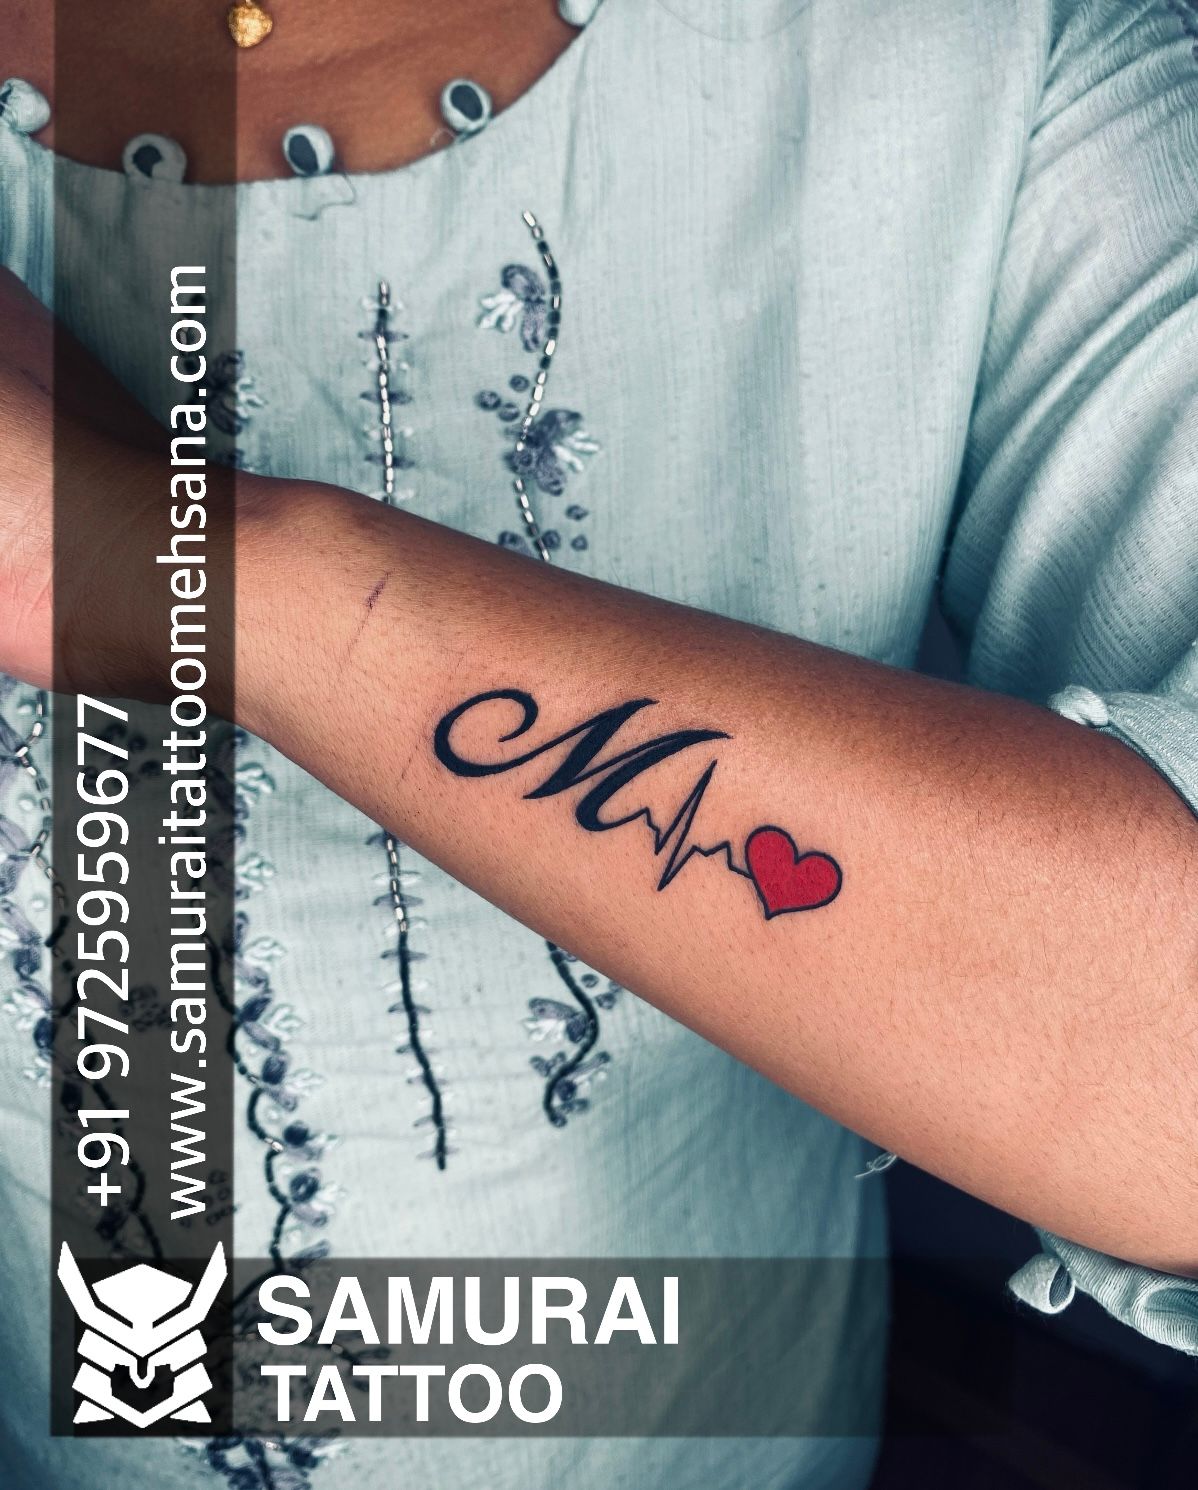 Tattoo uploaded by Vipul Chaudhary  M Font tattoo M logo M logo tattoo M  tattoo design  Tattoodo